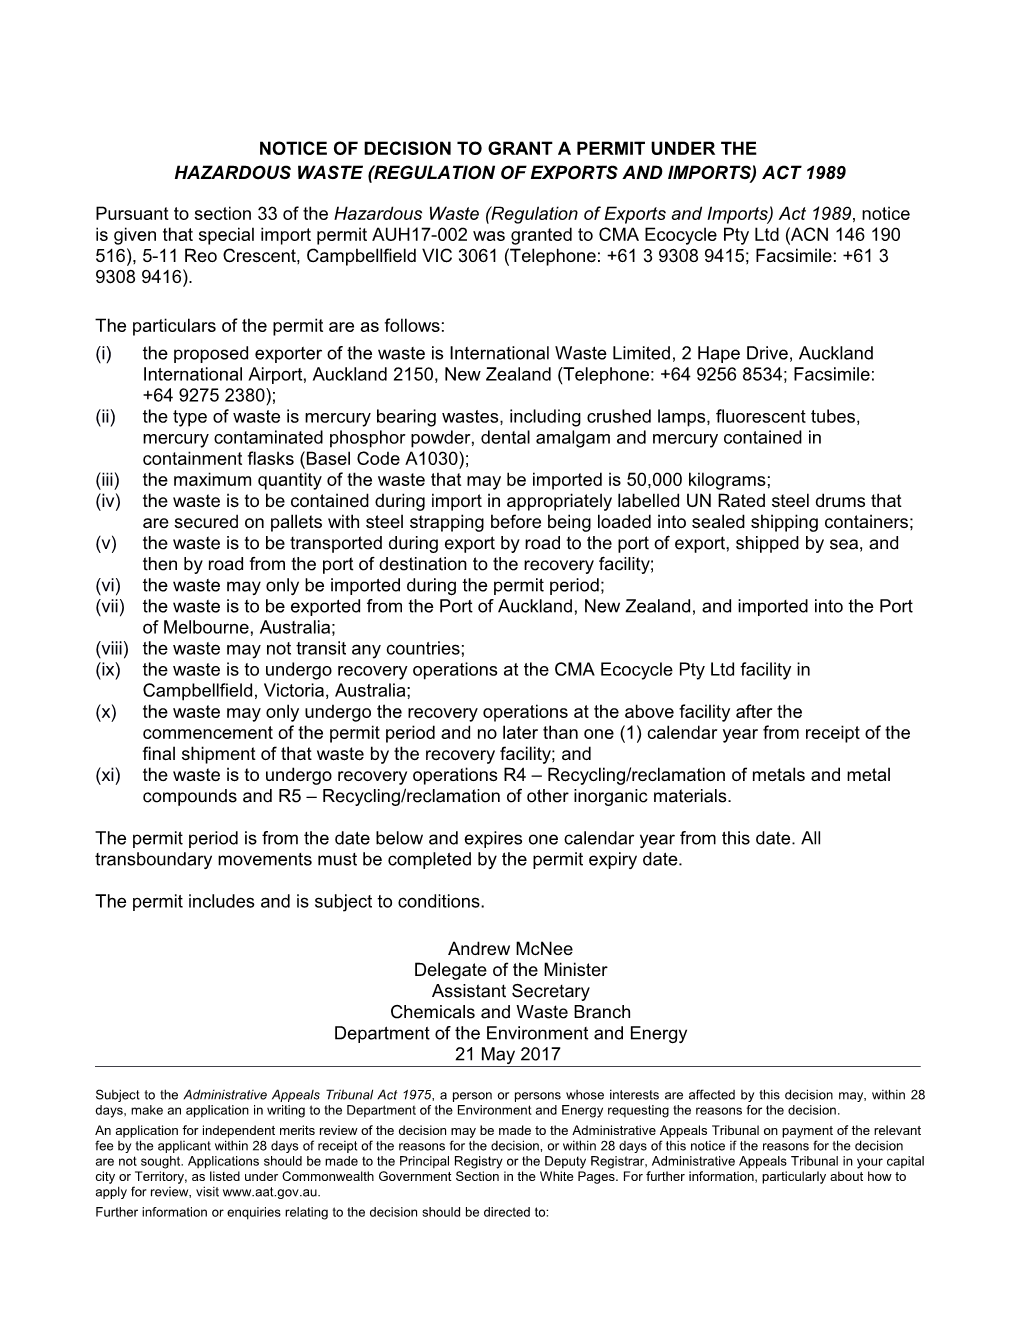 Notice of Decision to Grant a Permit to CMA Ecocycle Pty Ltd to Import Mercury Bearing